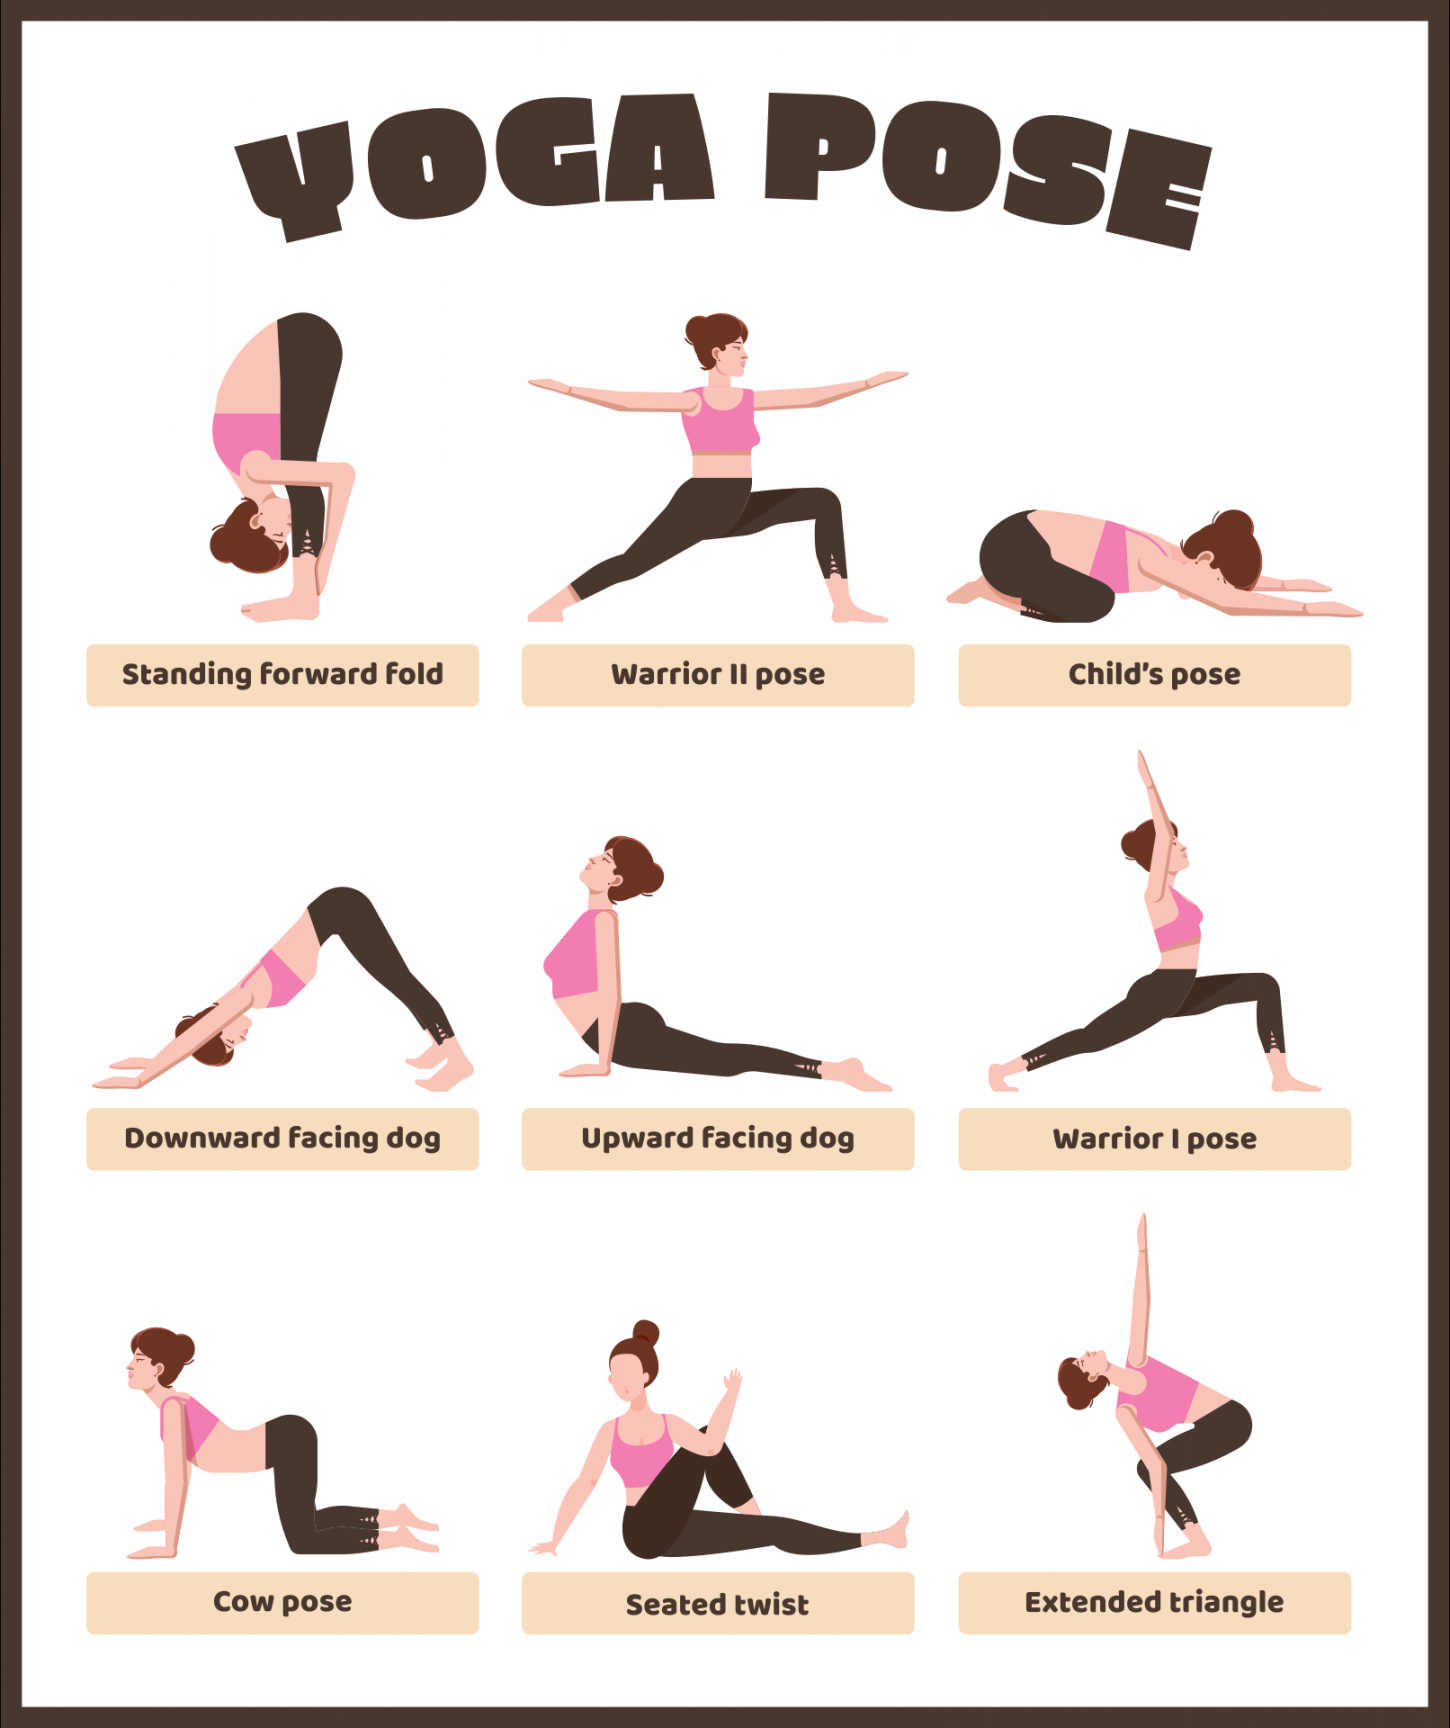 20 Best Yoga Poses For Beginners - Basic Yoga Moves To Know